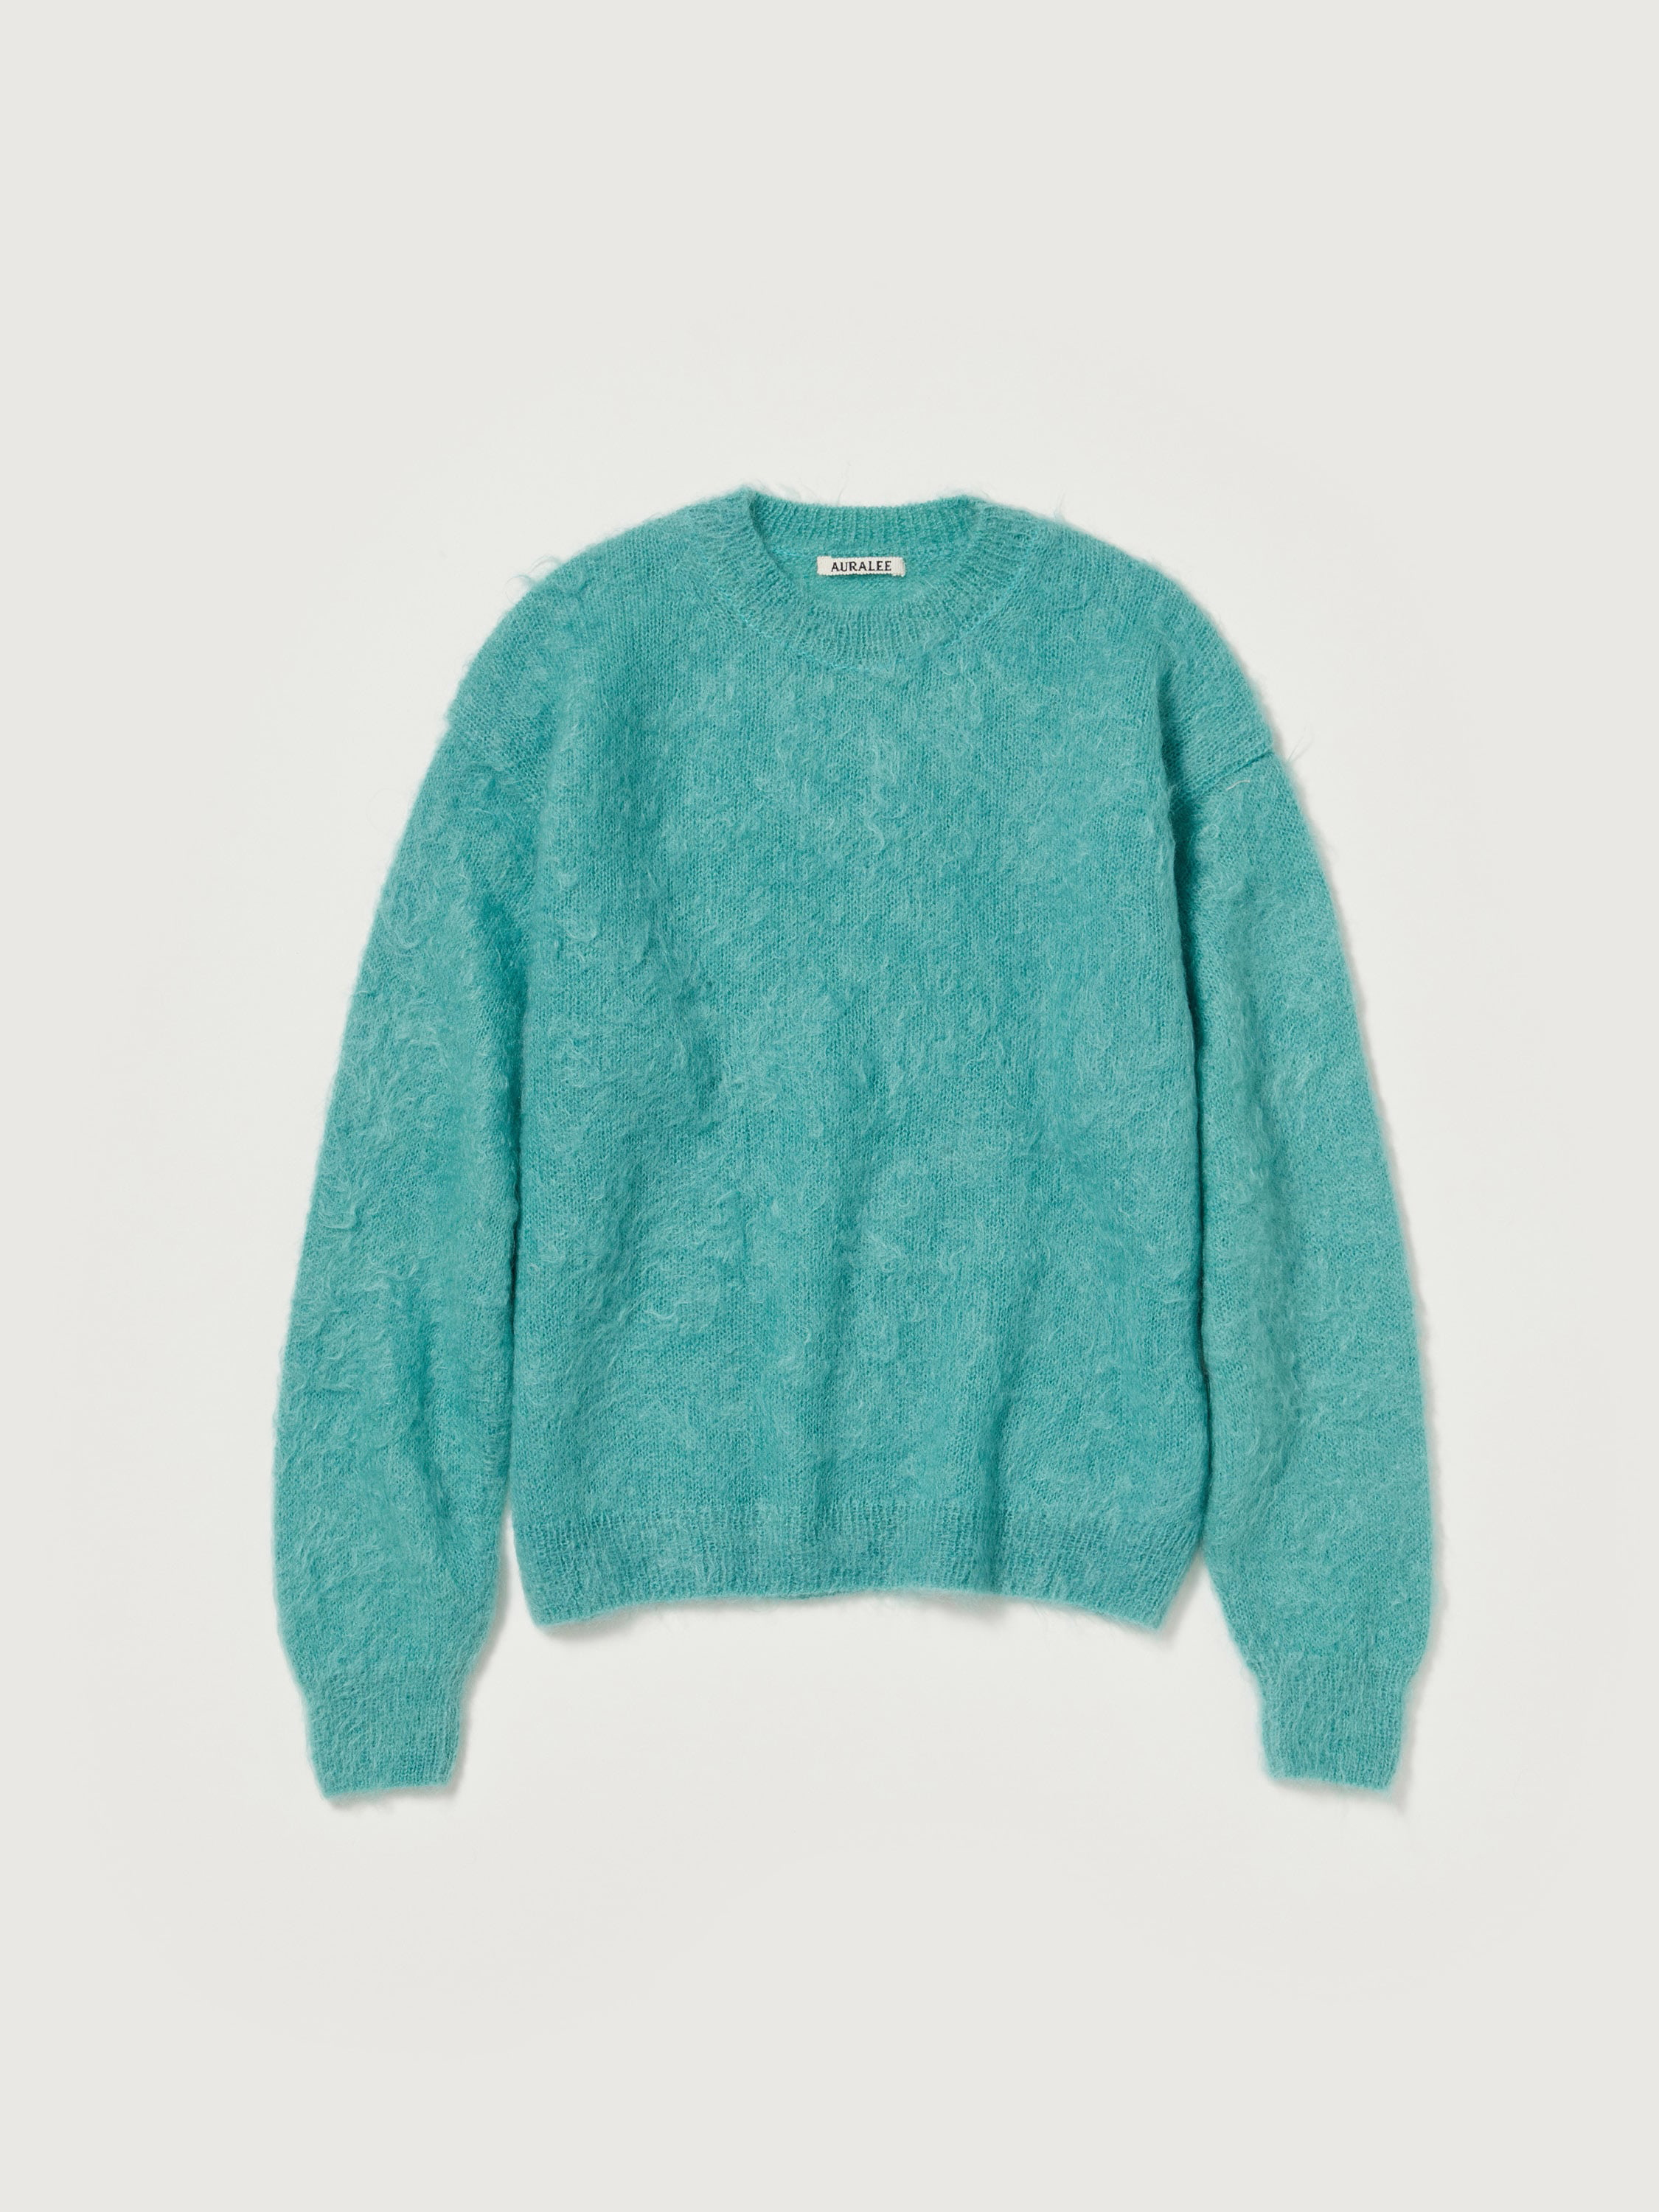 BRUSHED SUPER KID MOHAIR KNIT P/O 詳細画像 BLUE 1